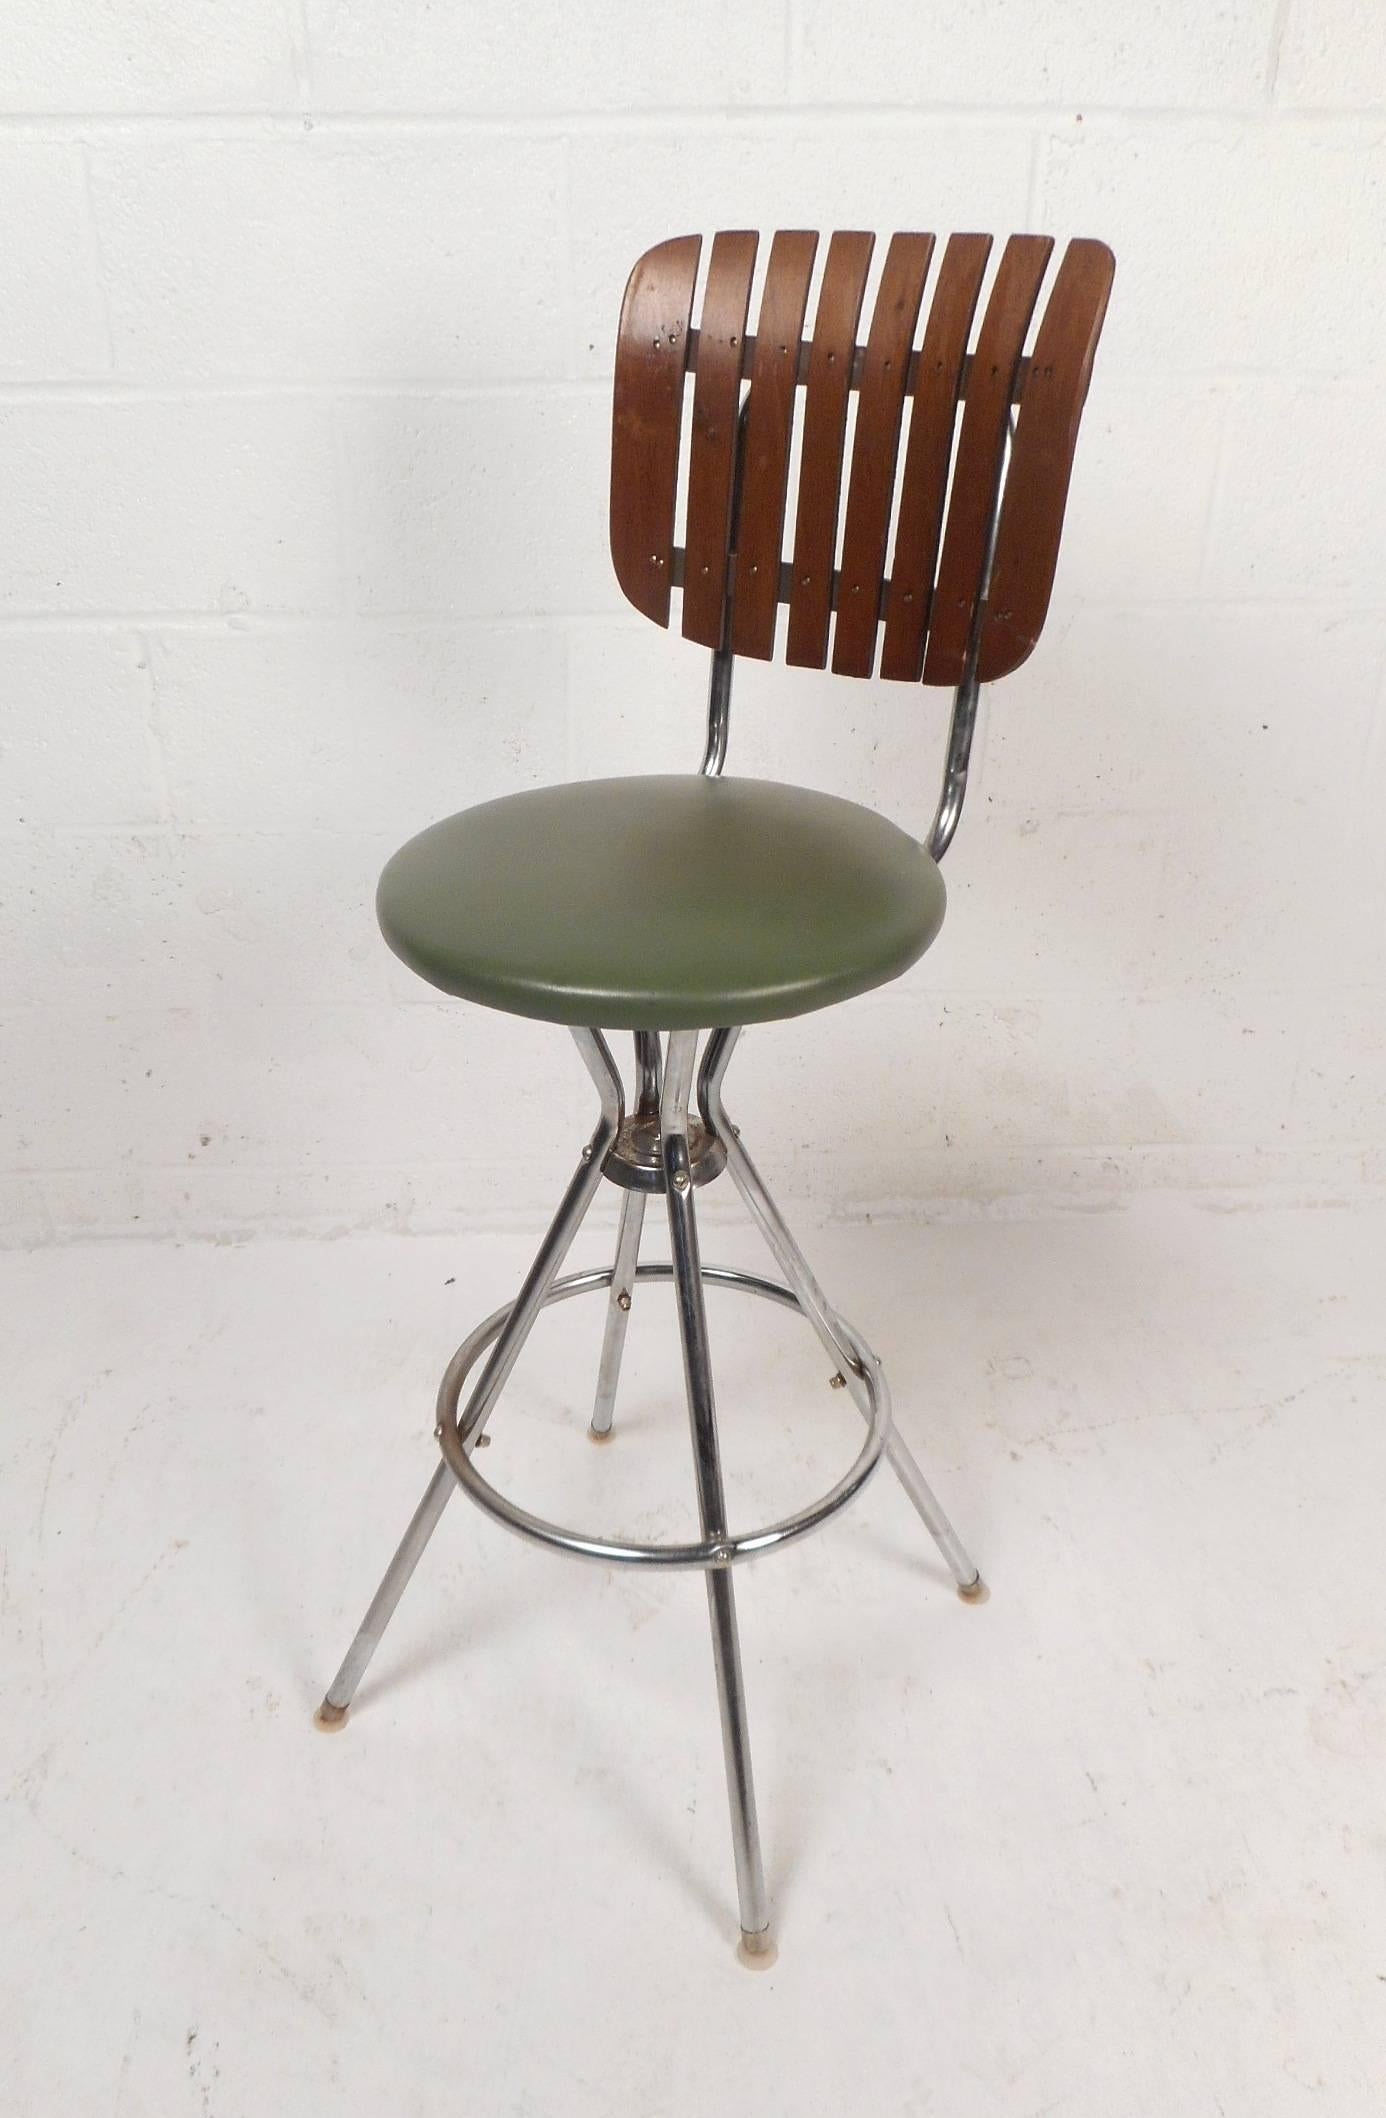 This beautiful set of four vintage modern bar stools by Arthur Umanoff feature uniquely shaped slatted back rests and wonderful green vinyl seats. Sleek design sits on top of a tubular chrome frame with unusual splayed legs. These unique bar stools